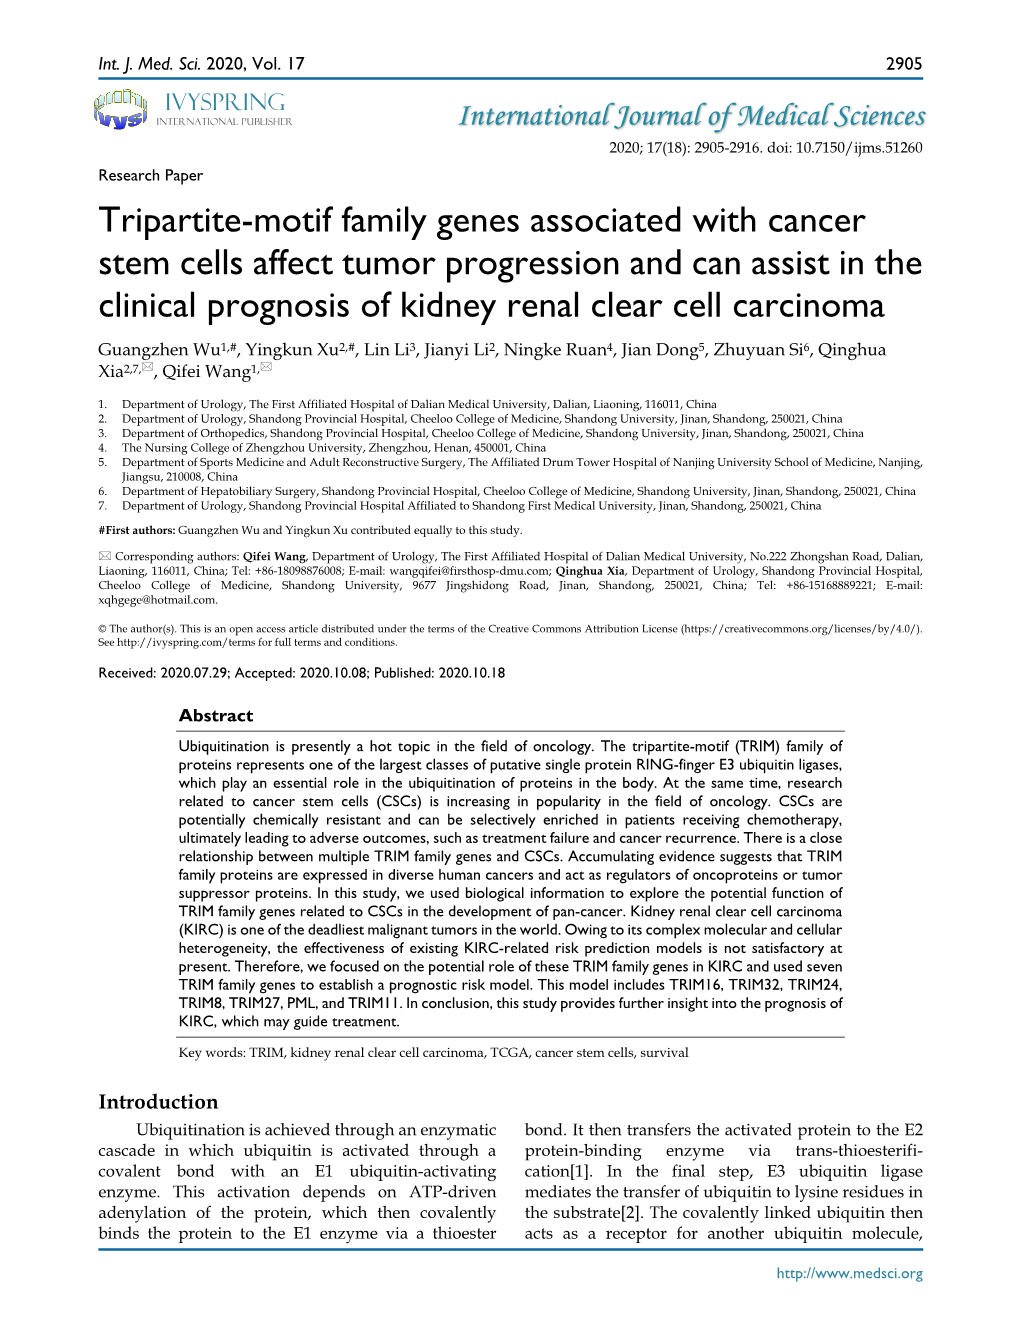 Tripartite-Motif Family Genes Associated with Cancer Stem Cells